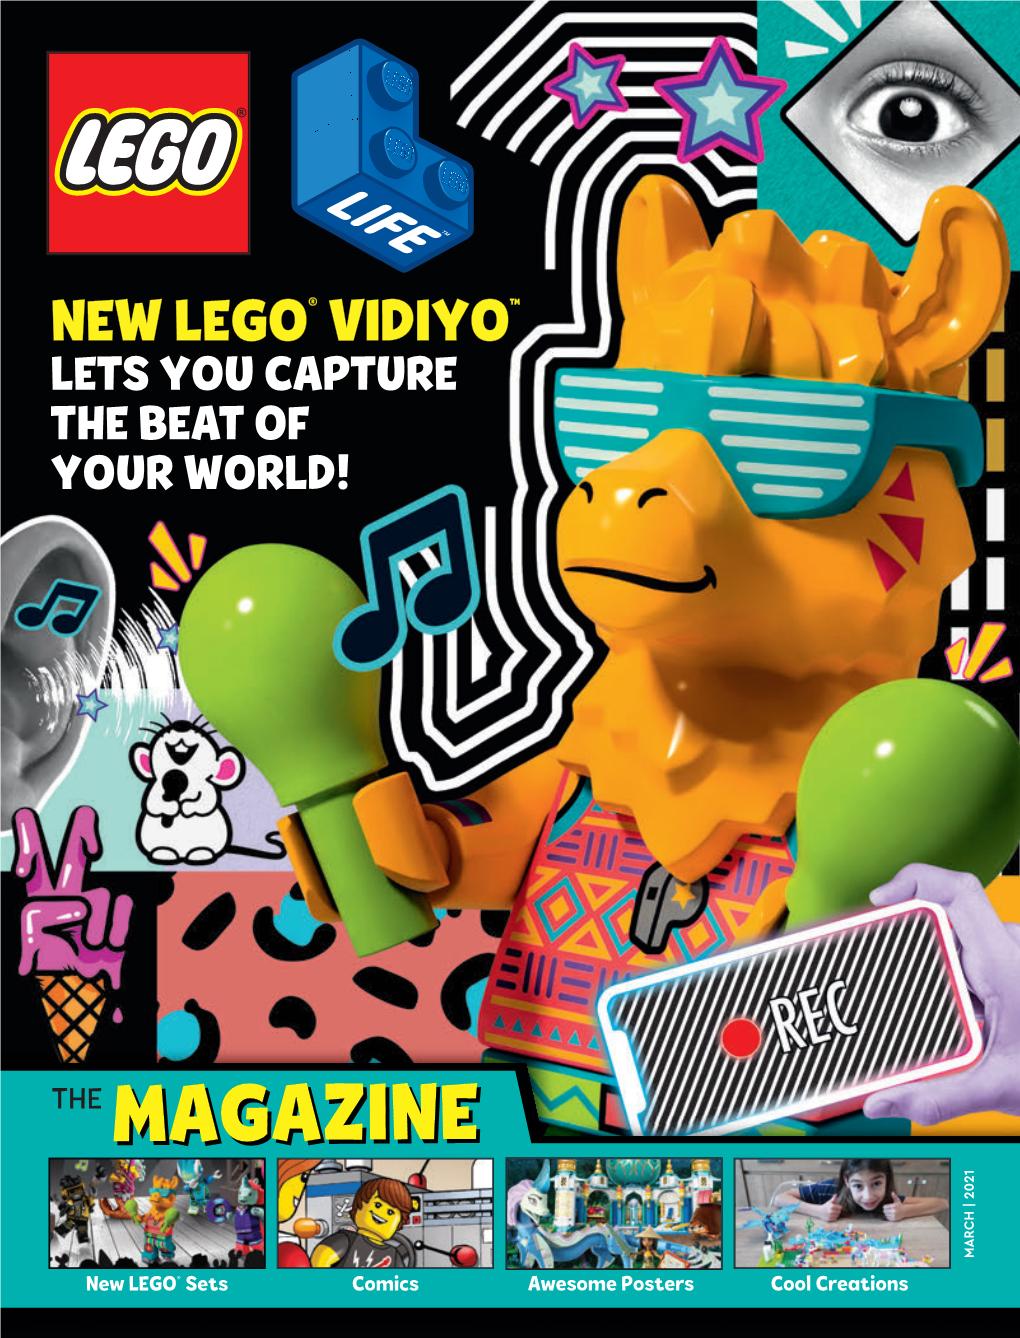 THE MAGAZINEMAGAZINE MARCH | 2021 New LEGO® Sets Comics Awesome Posters Cool Creations